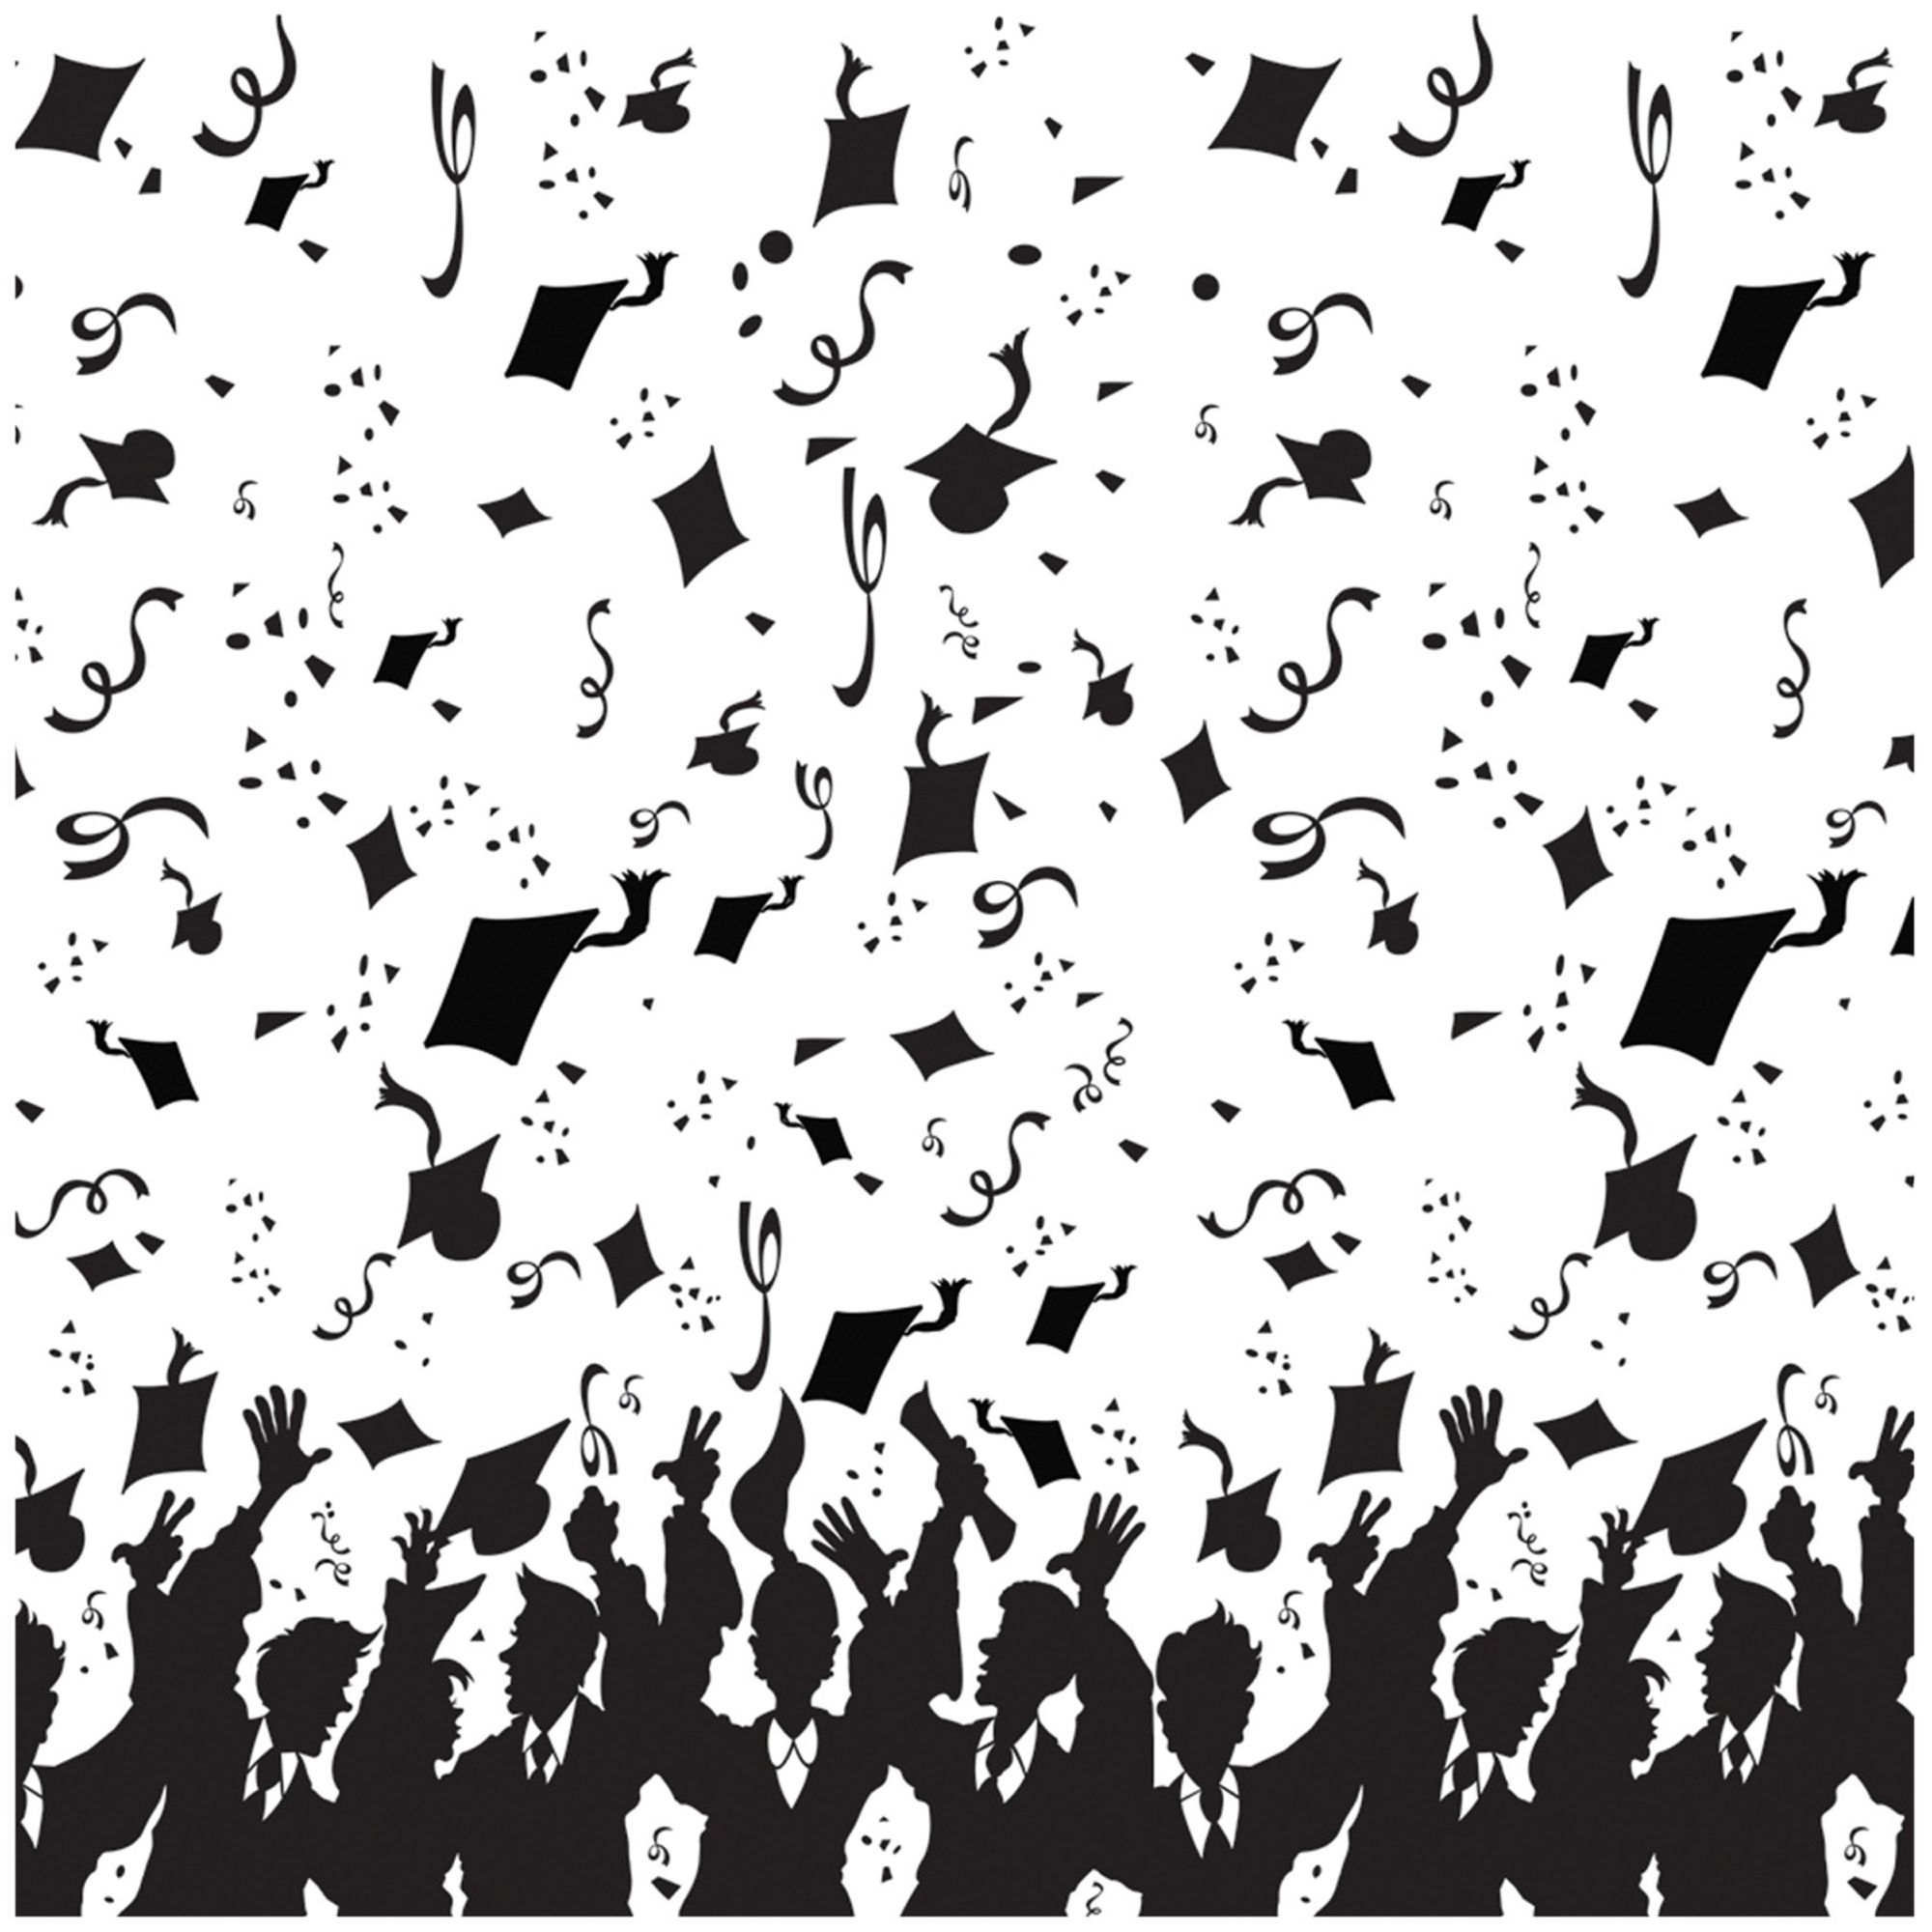 The Costume Center 30' Black and White Graduation Photo Backdrop Party Decorations